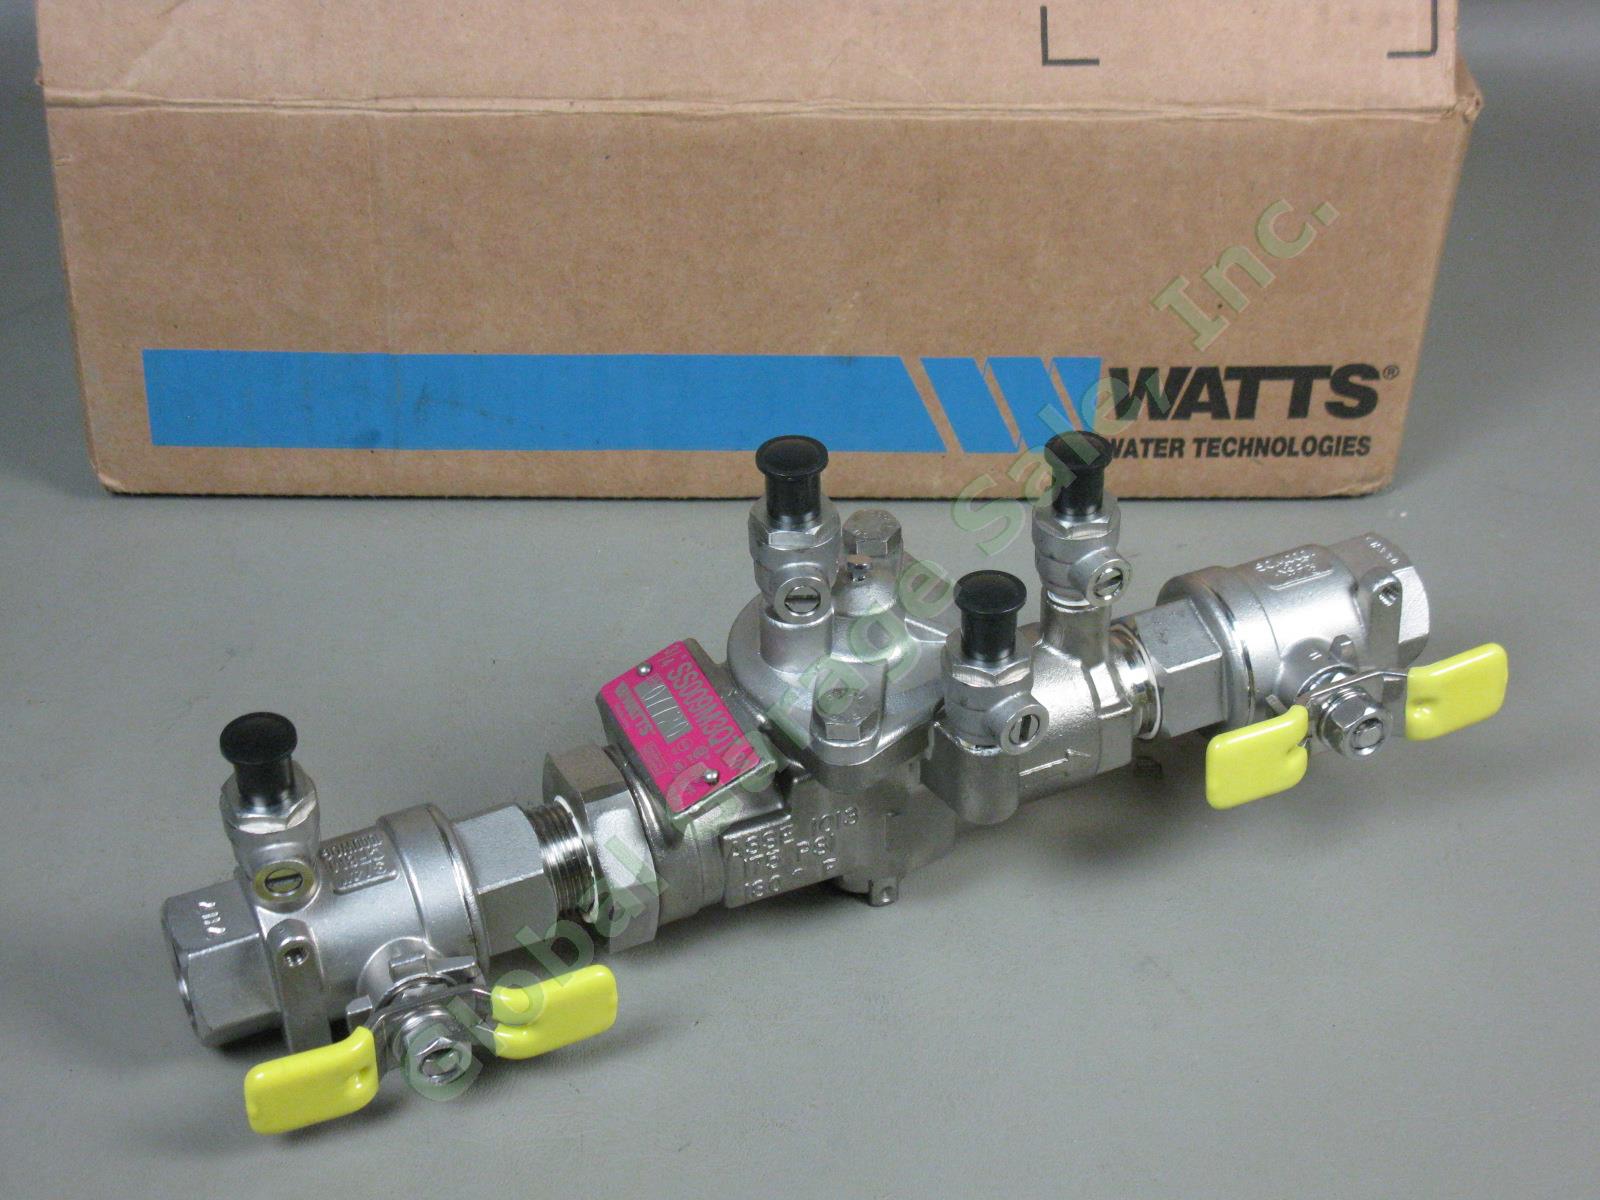 Watts 3/4" Stainless Steel Reduced Pressure Zone Assembly SS009M3-QT Backflow NR